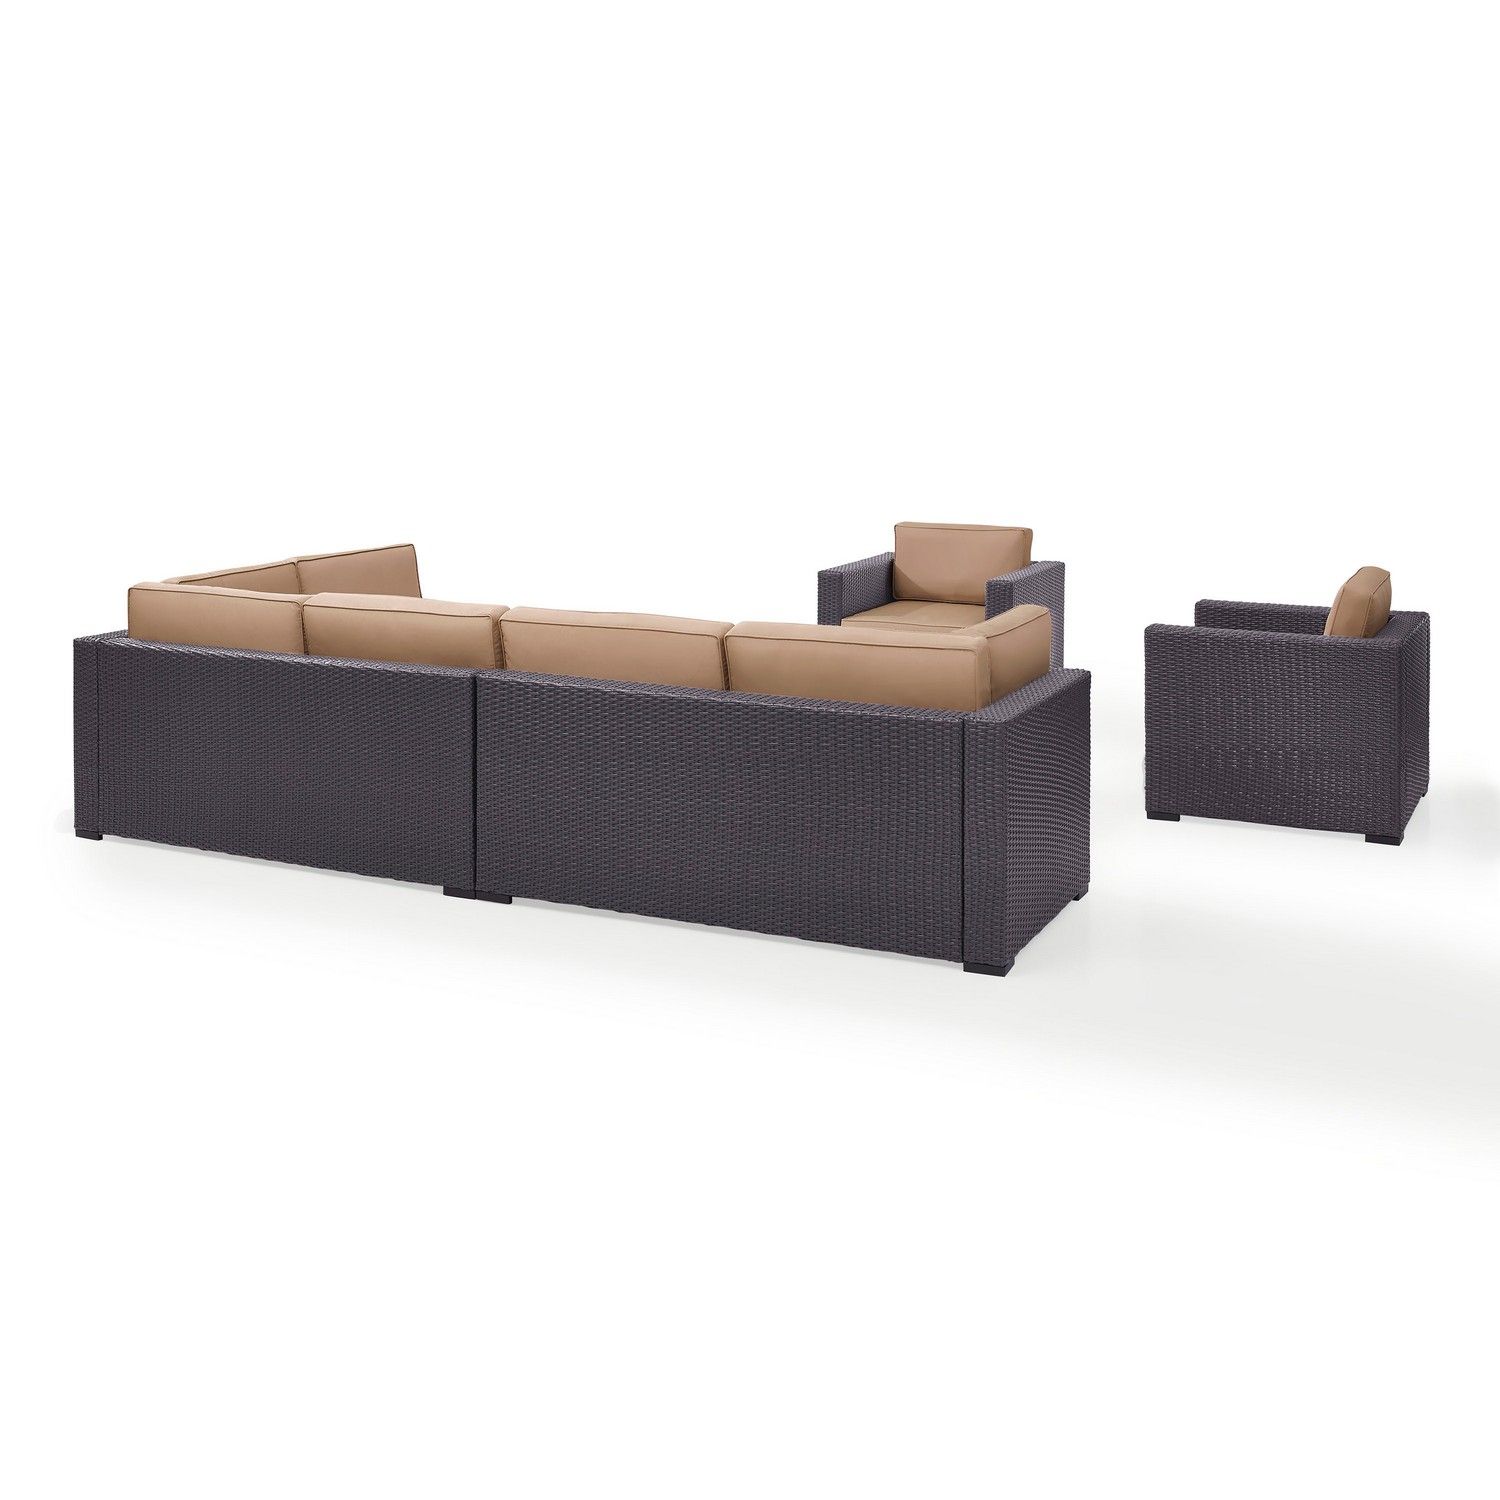 Crosley Biscayne 7-PC Outdoor Wicker Sectional Set - 2 Loveseats, 2 Arm Chairs, Armless Chair, Coffee Table, Ottoman - Mocha/Brown